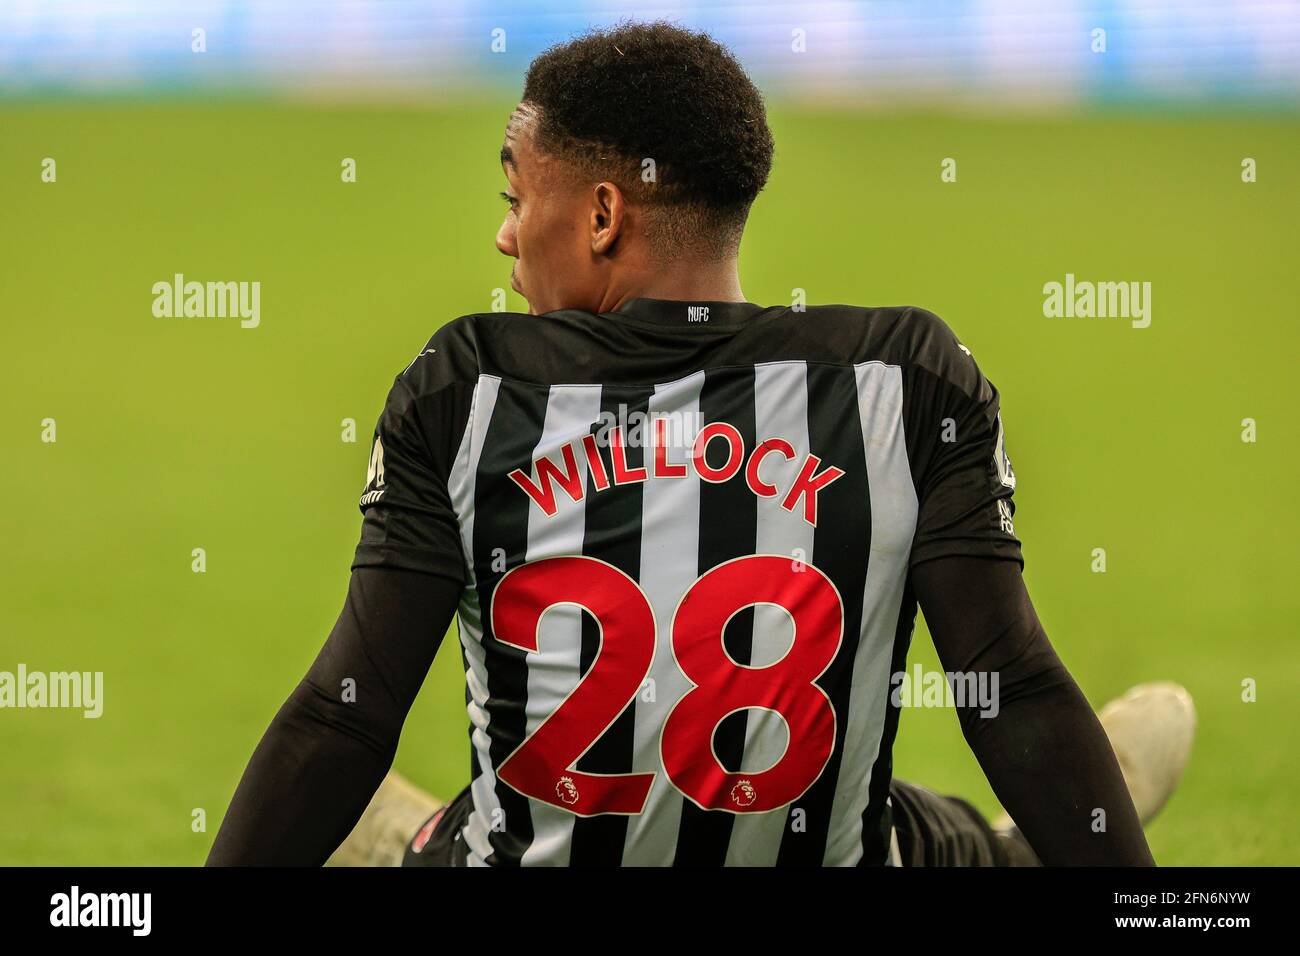 Newcastle, UK. 14th May, 2021. Joe Willock #28 of Newcastle United sits on the pitch after the full-time whistle is blown by referee Kevin Friend in Newcastle, United Kingdom on 5/14/2021. (Photo by Iam Burn/News Images/Sipa USA) Credit: Sipa USA/Alamy Live News Stock Photo